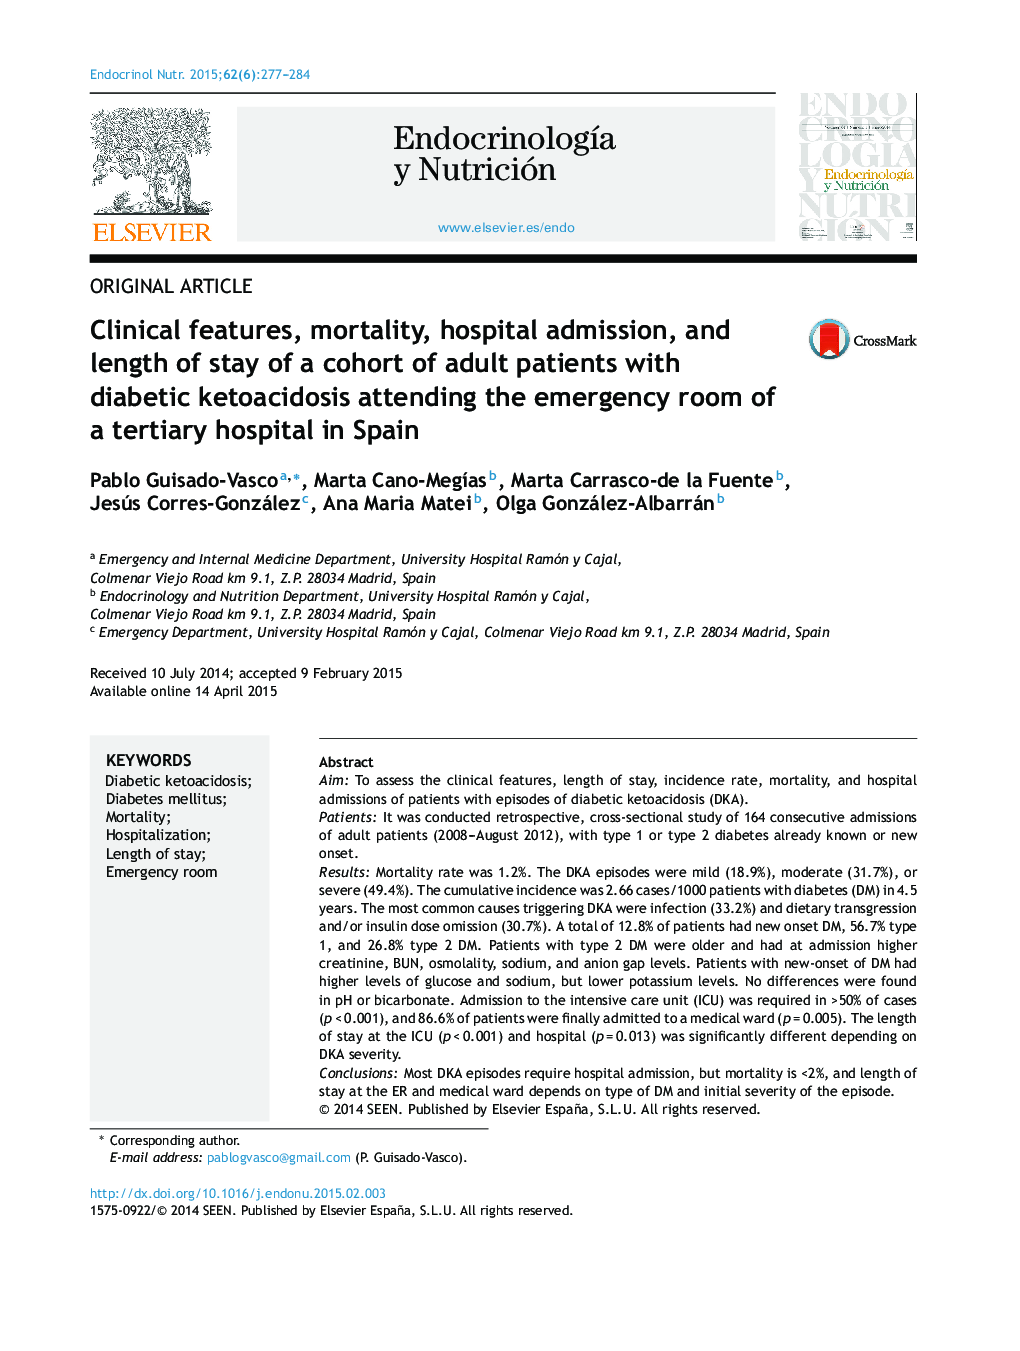 Clinical features, mortality, hospital admission, and length of stay of a cohort of adult patients with diabetic ketoacidosis attending the emergency room of a tertiary hospital in Spain